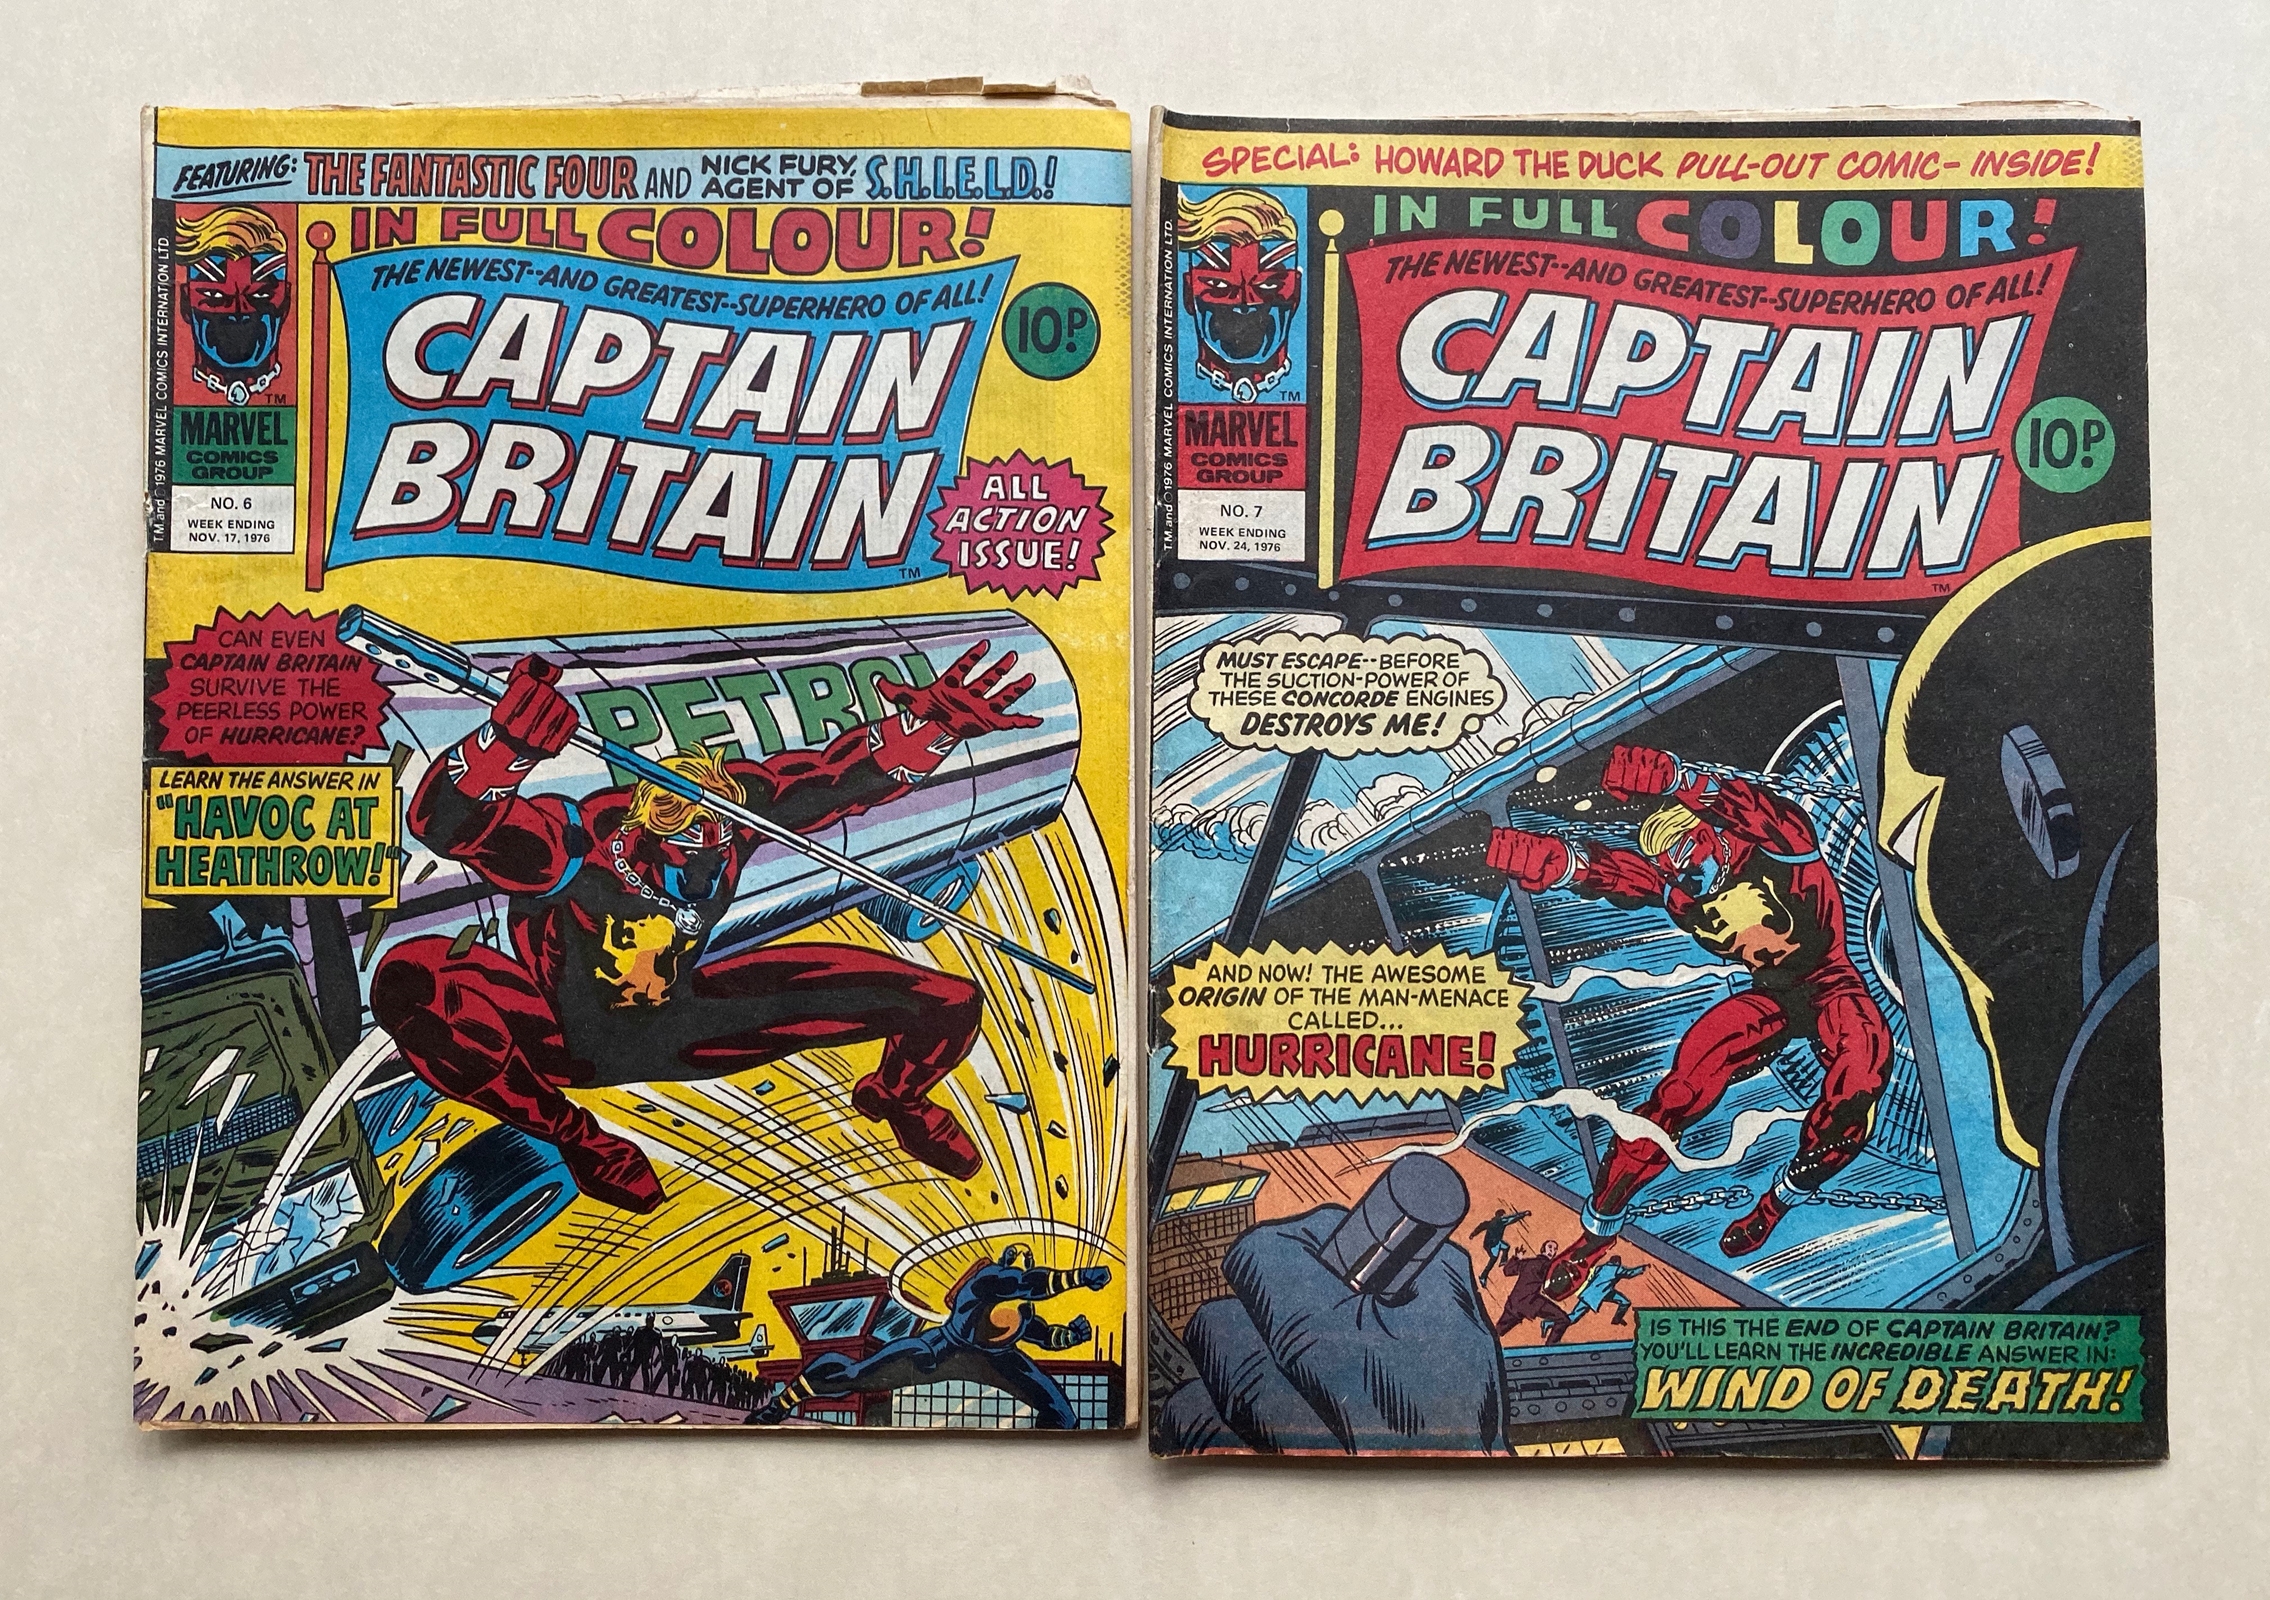 CAPTAIN BRITAIN (6 in Lot) - (1976 - BRITISH MARVEL) - GD/VG (Pence Copy) - Run includes #2, 4, 5, - Image 7 of 8